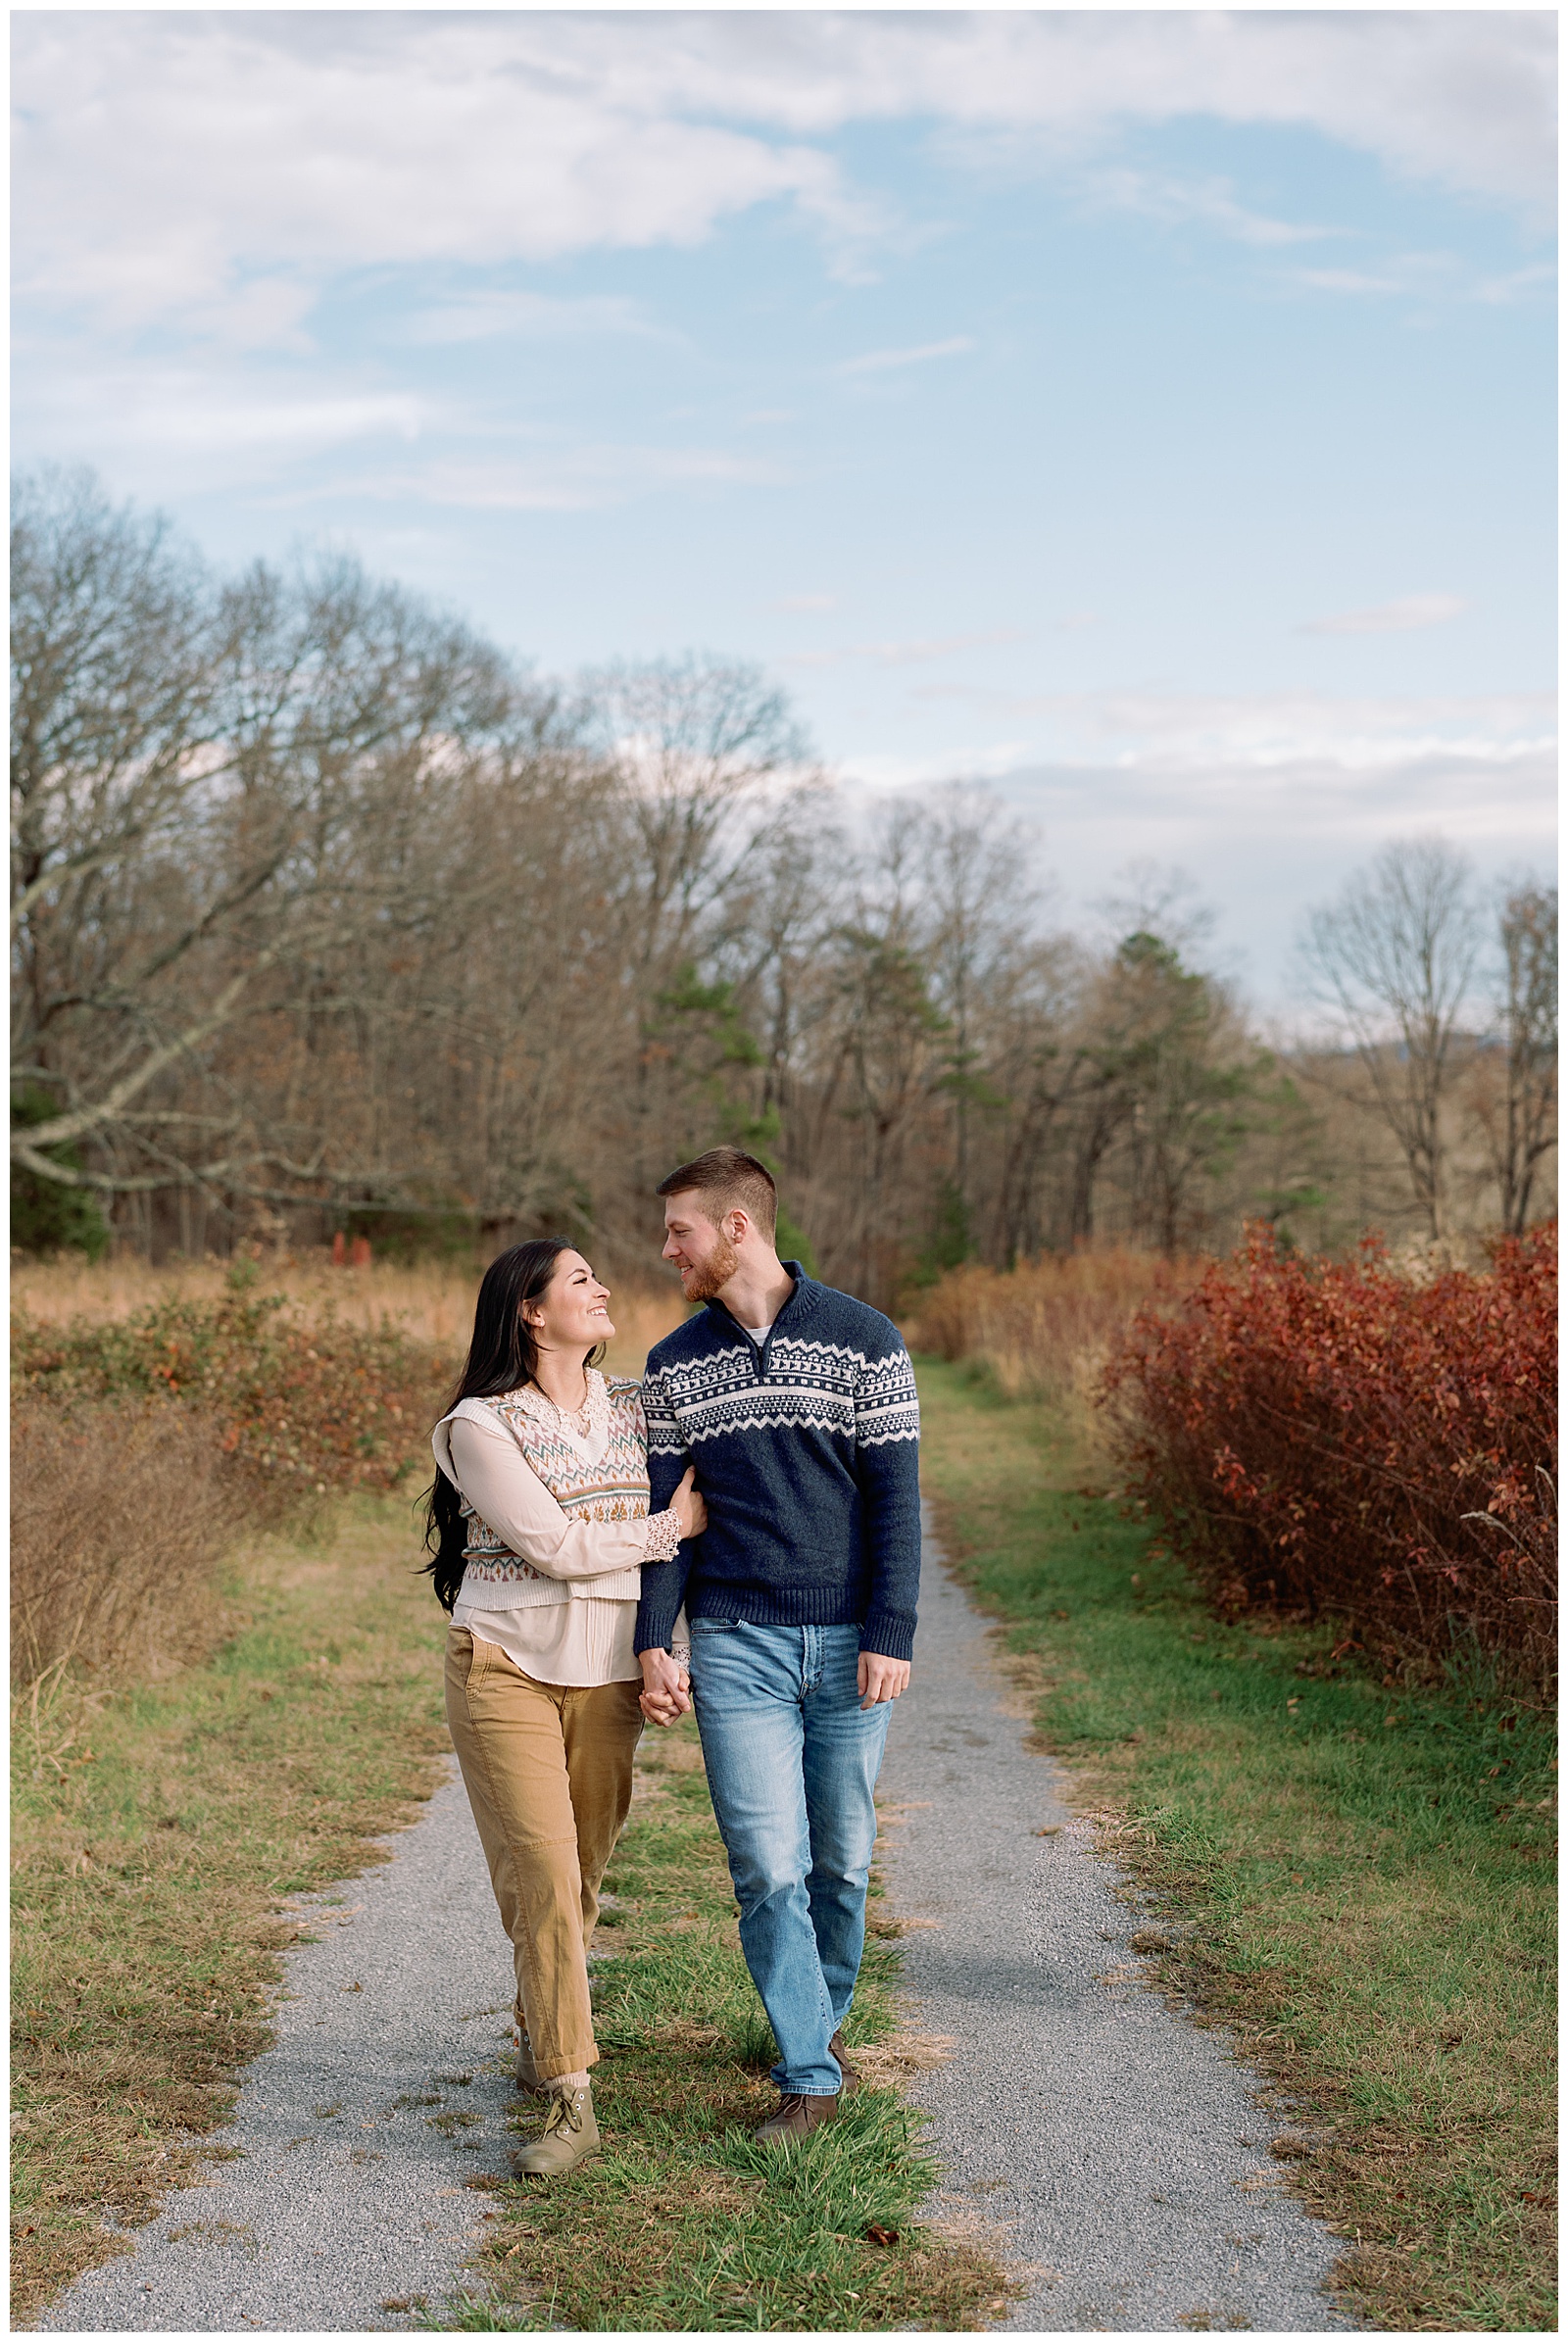 Engaged man and woman wearing sweaters in winter walking holding hands at their farm engagement session.